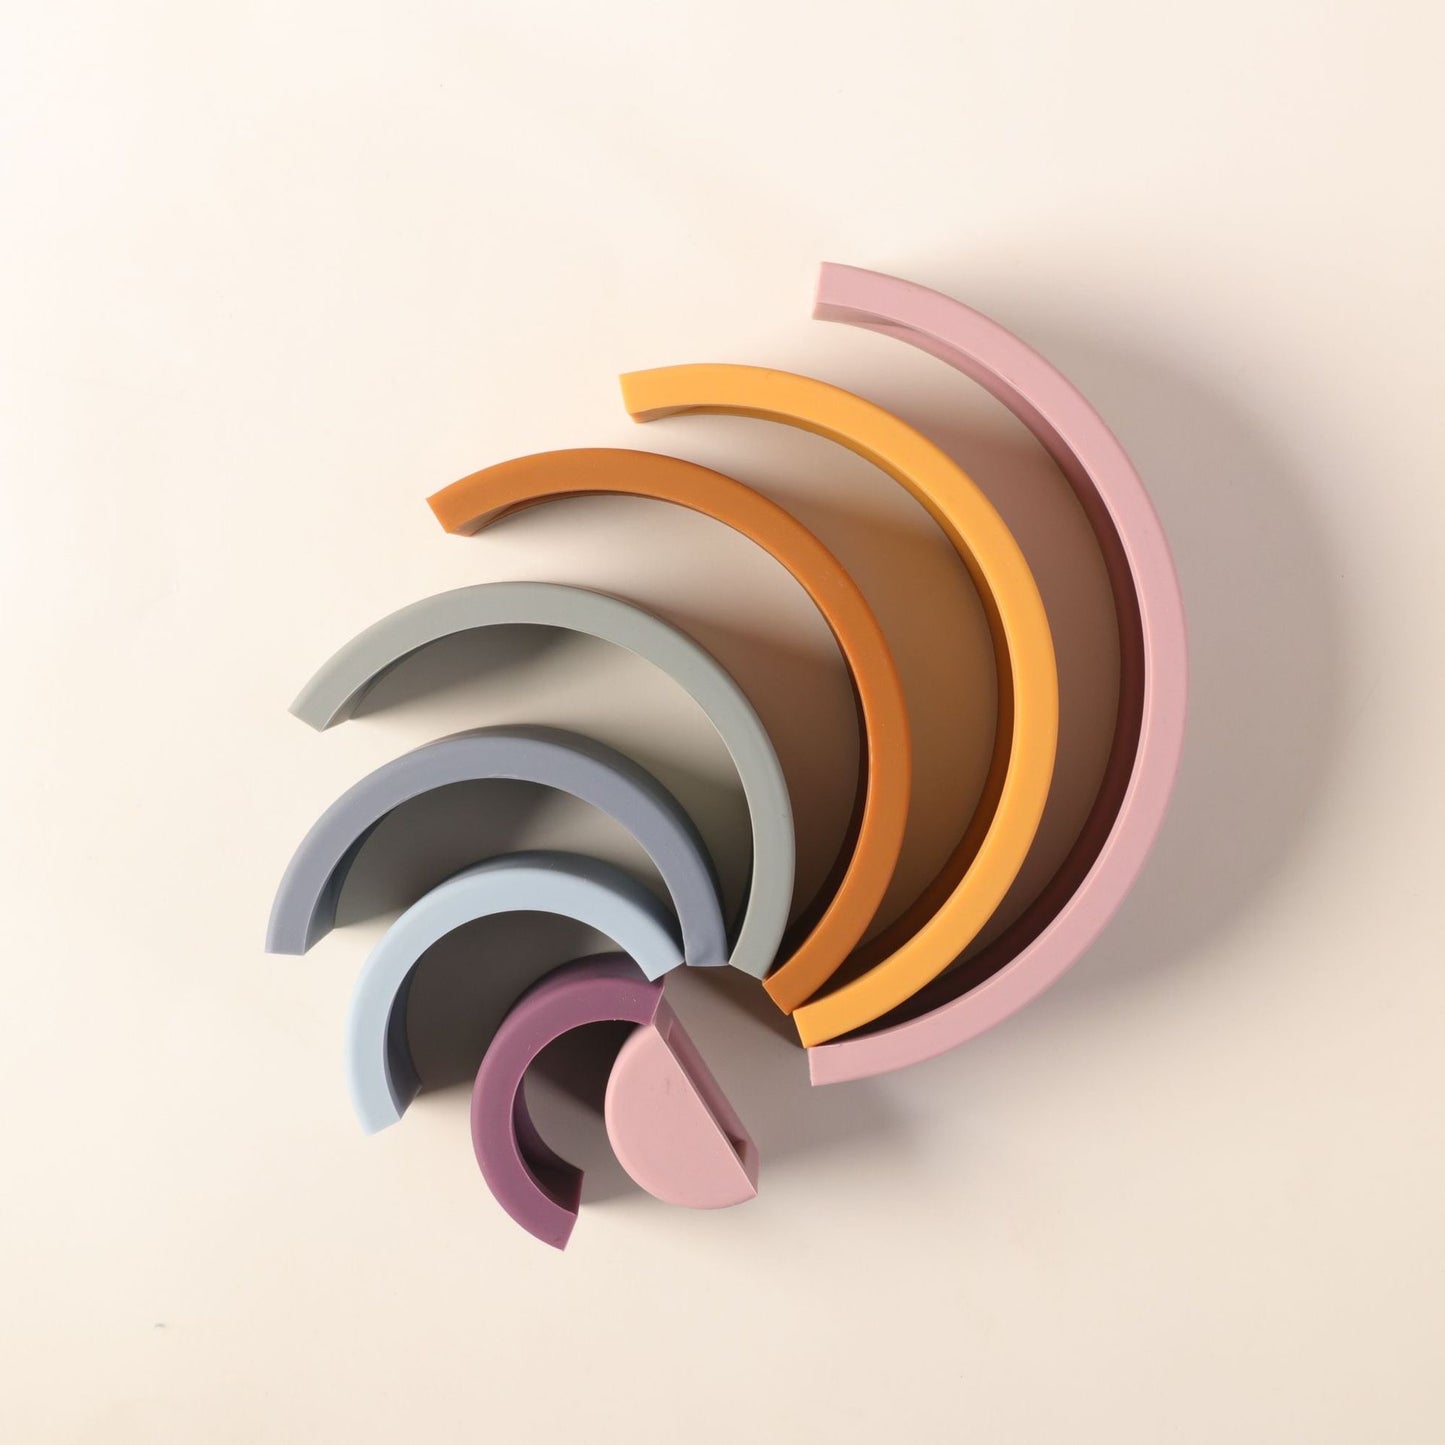 Soft colors 8 pcs stacking wooden rainbow